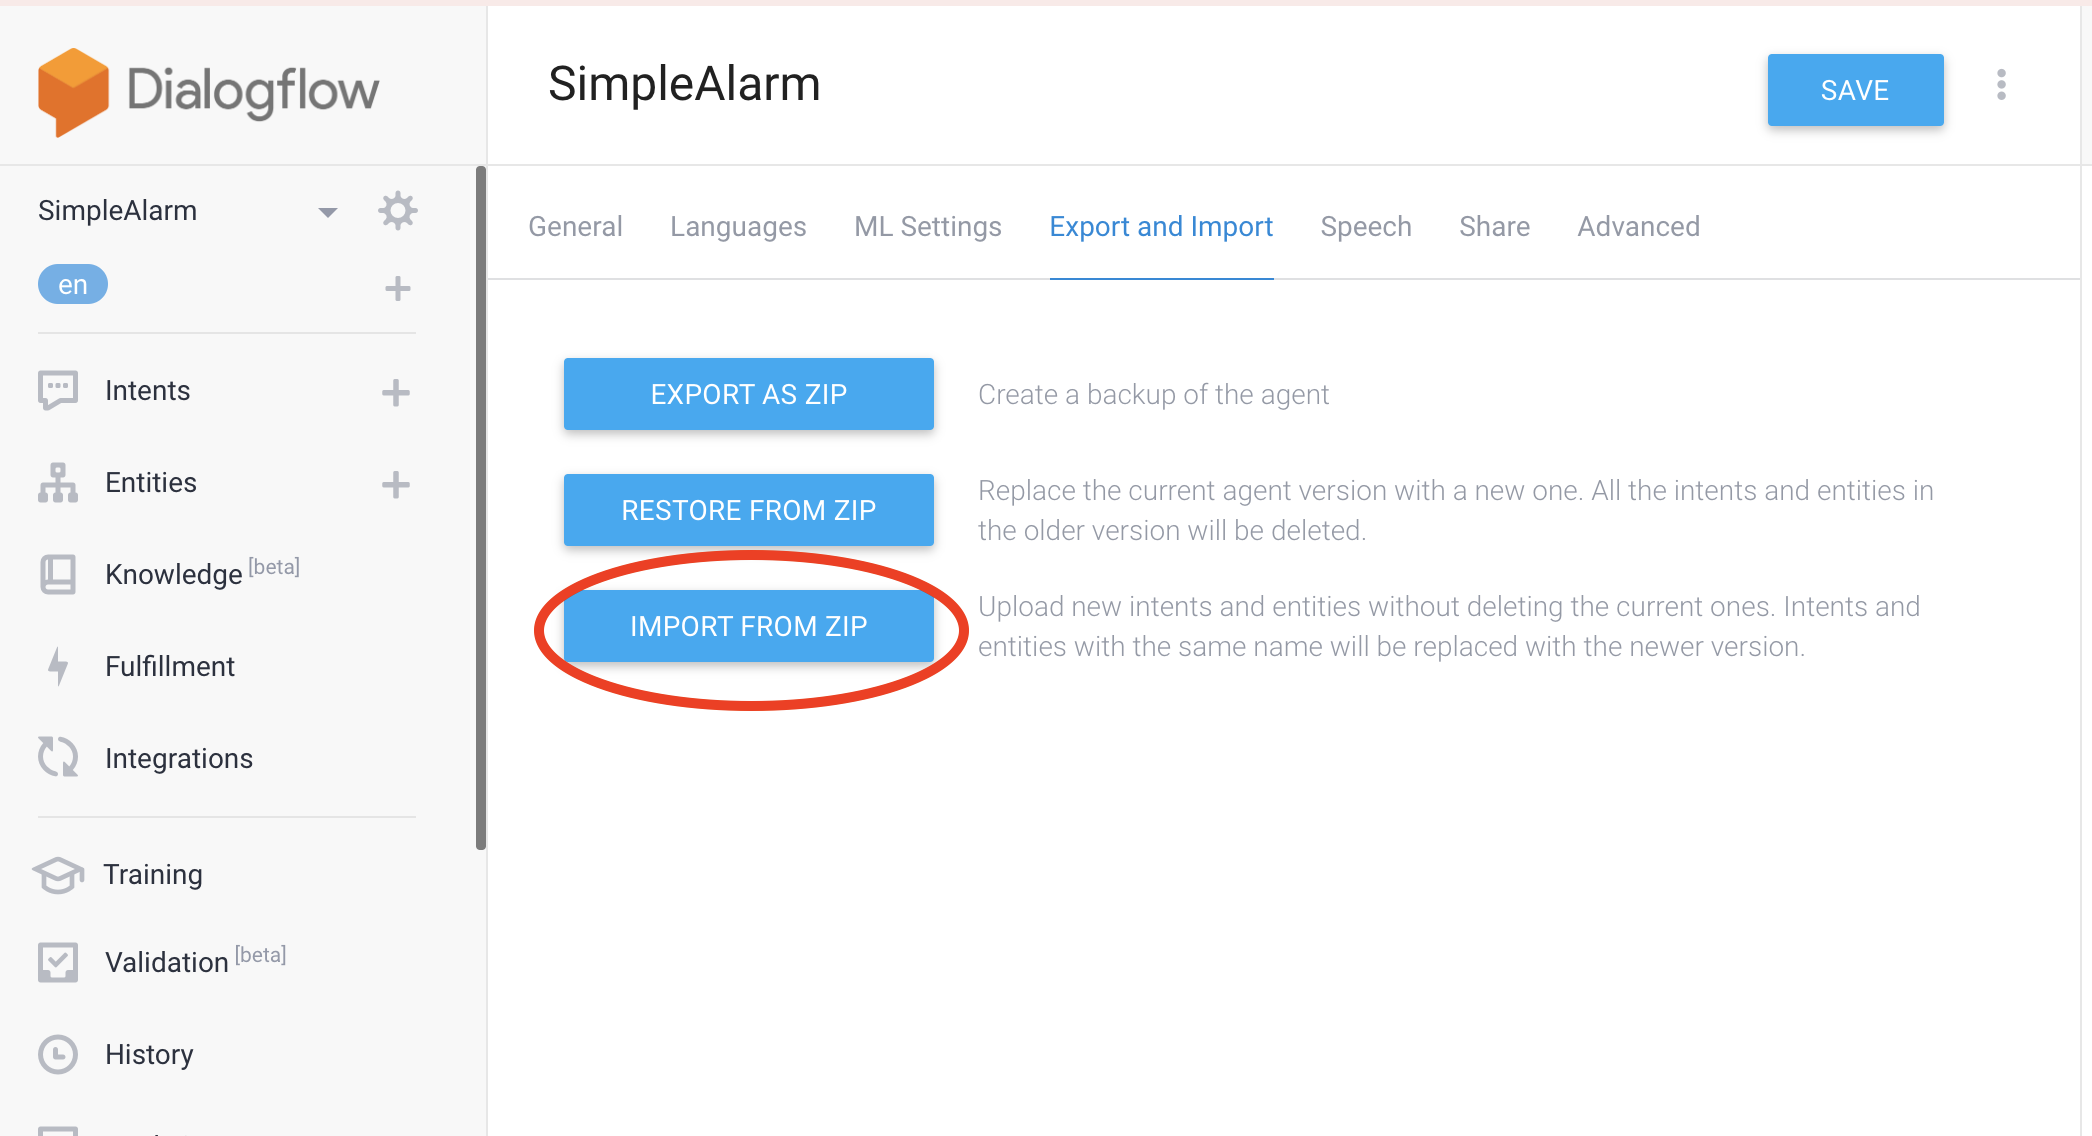 Create a new agent named “SimpleAlarm.” Under the gear icon -> “Export and Import” click “Import from Zip” and upload the file “SimpleAlarmAgent.zip”